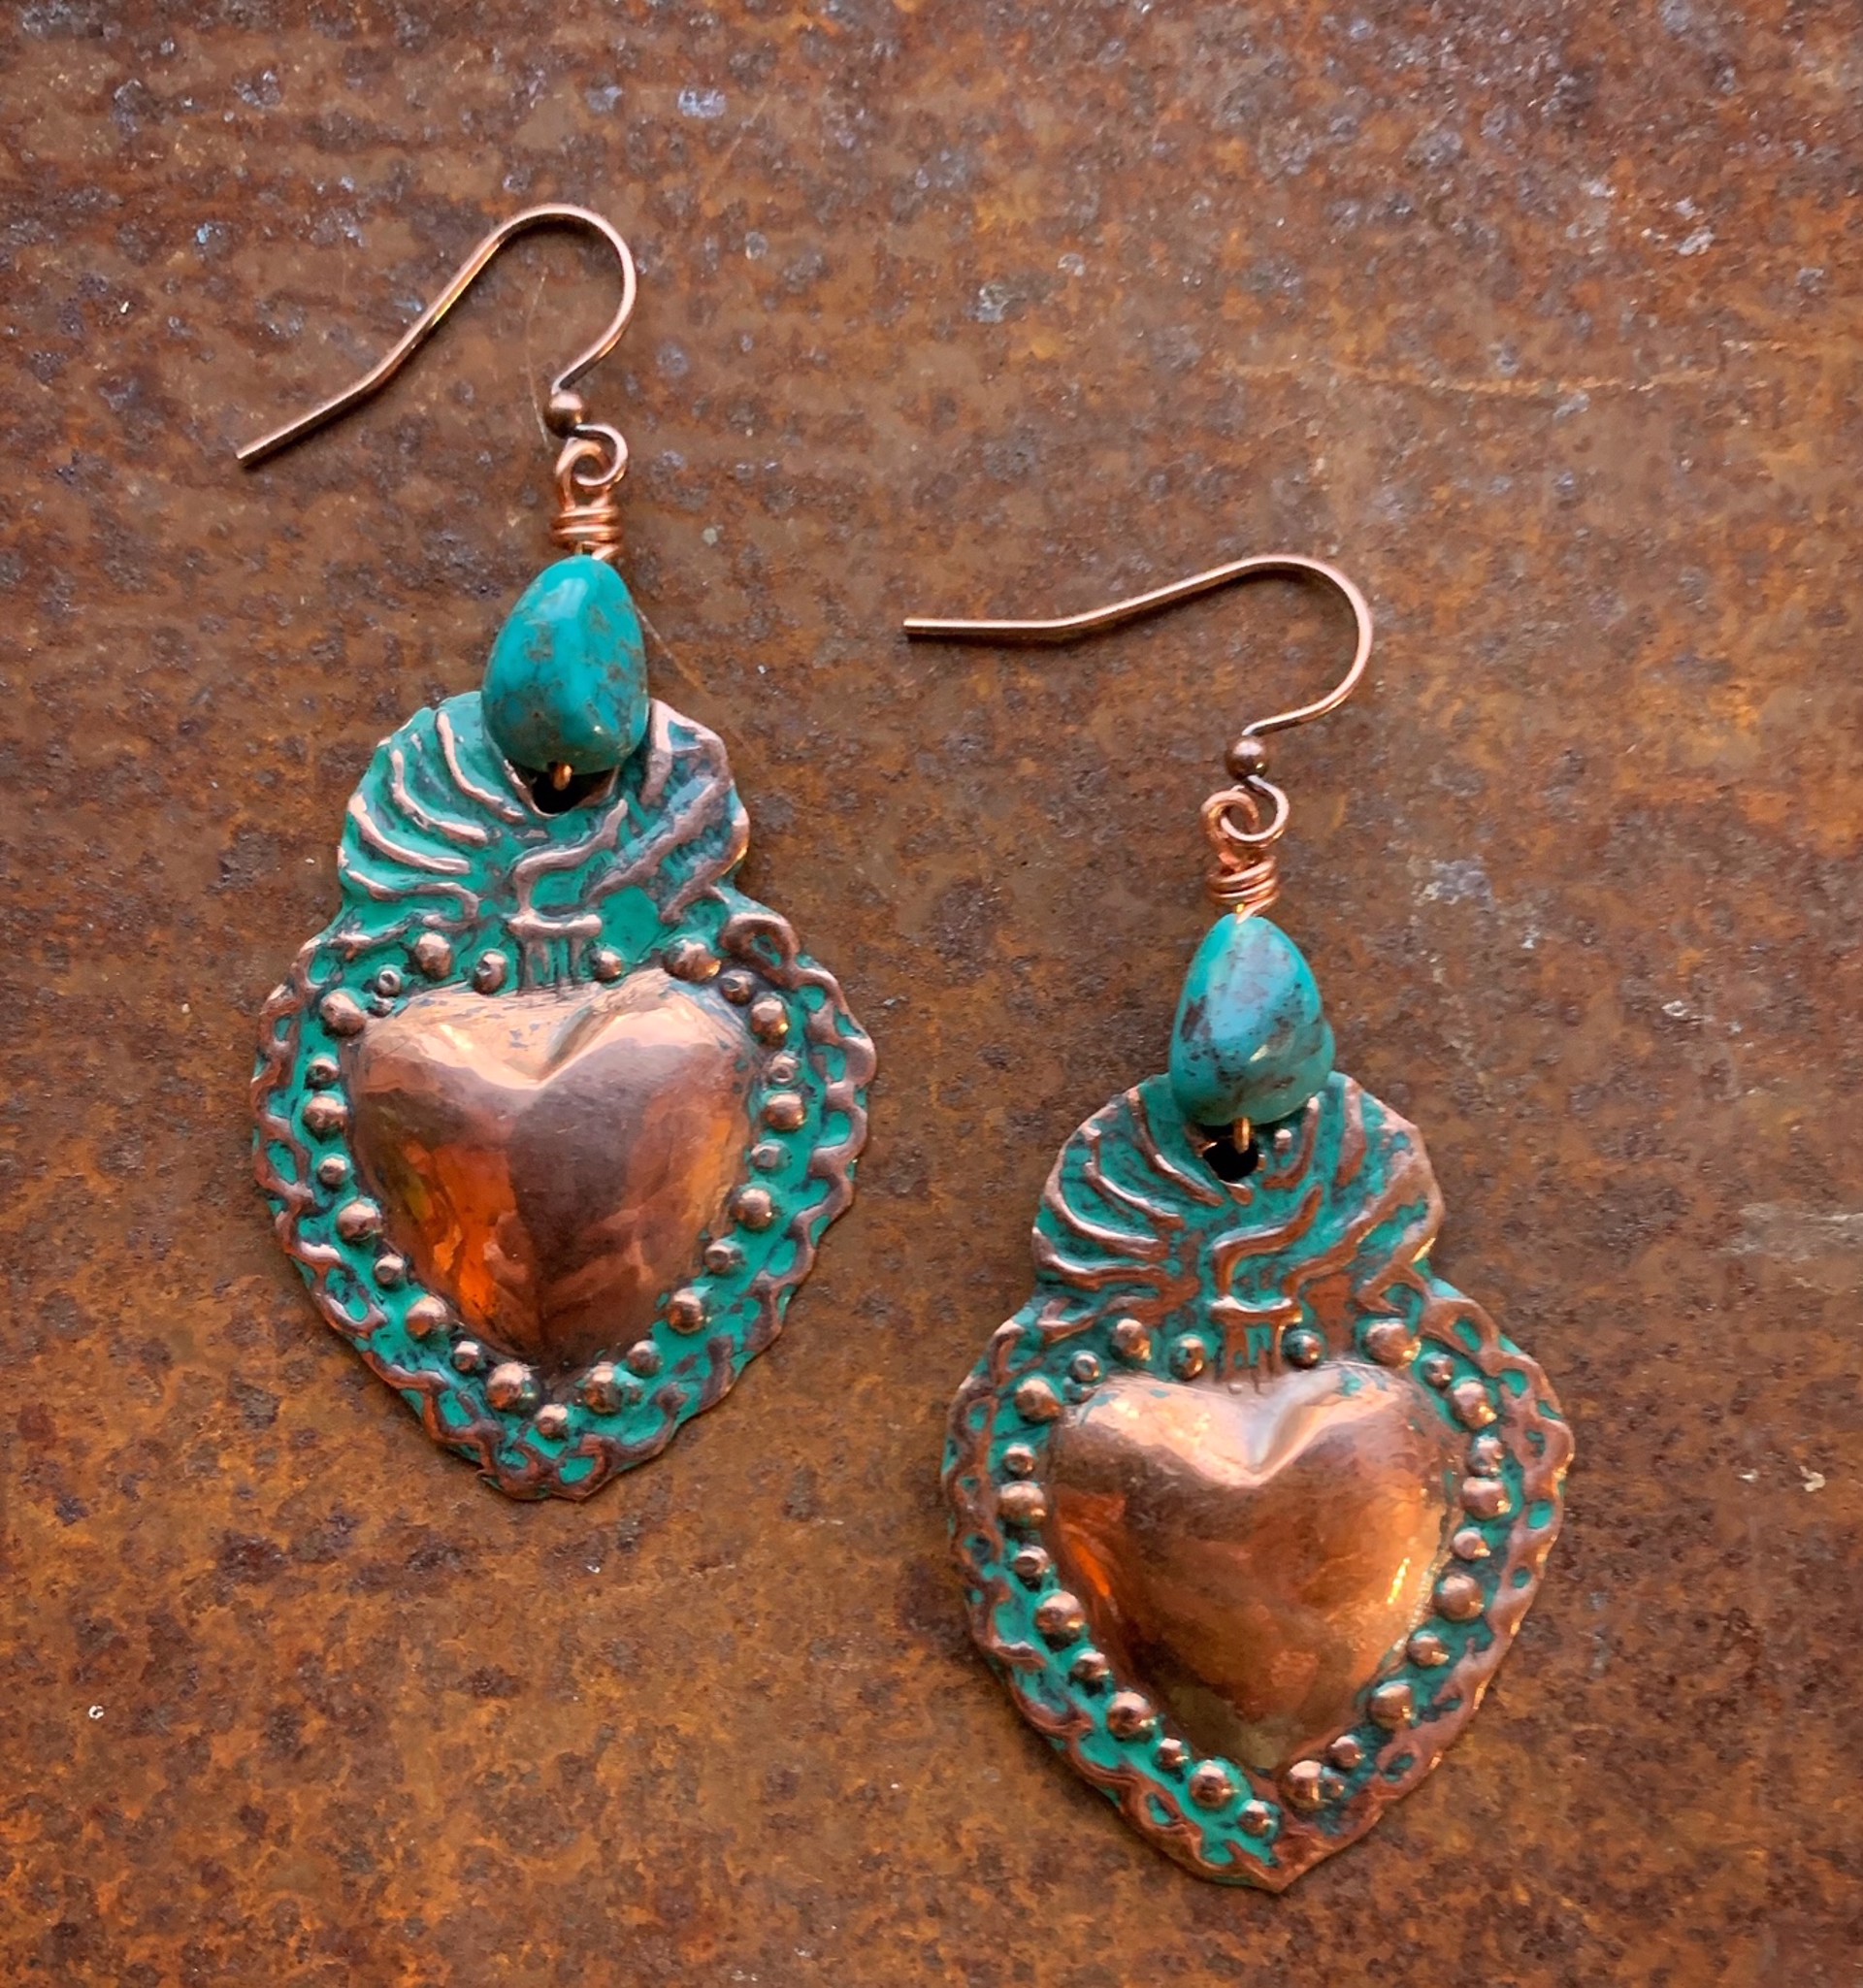 K797 Eacred Heart Earrings with Turquoise by Kelly Ormsby